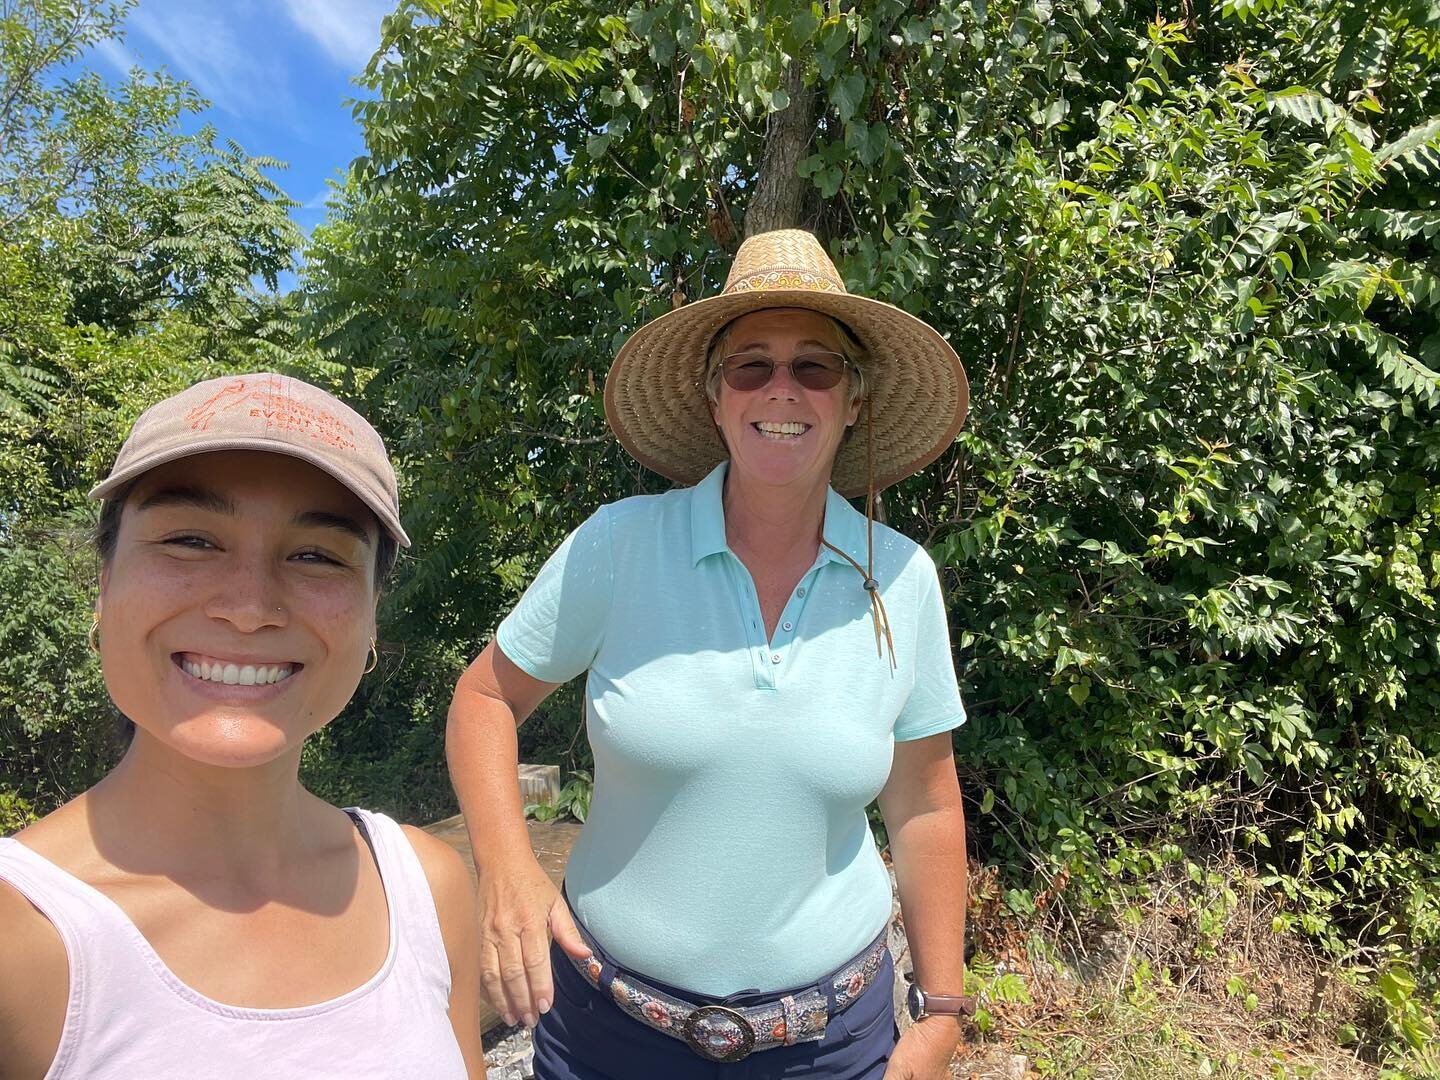 Had a great time volunteering at Hunt Club HT, and meeting one of SEE&rsquo;s founders, Heather! Heather was TDing today, she wears many hats 👒 in every sense of the phrase. So glad we got to meet in person today. It&rsquo;s been busy at Overlook, t